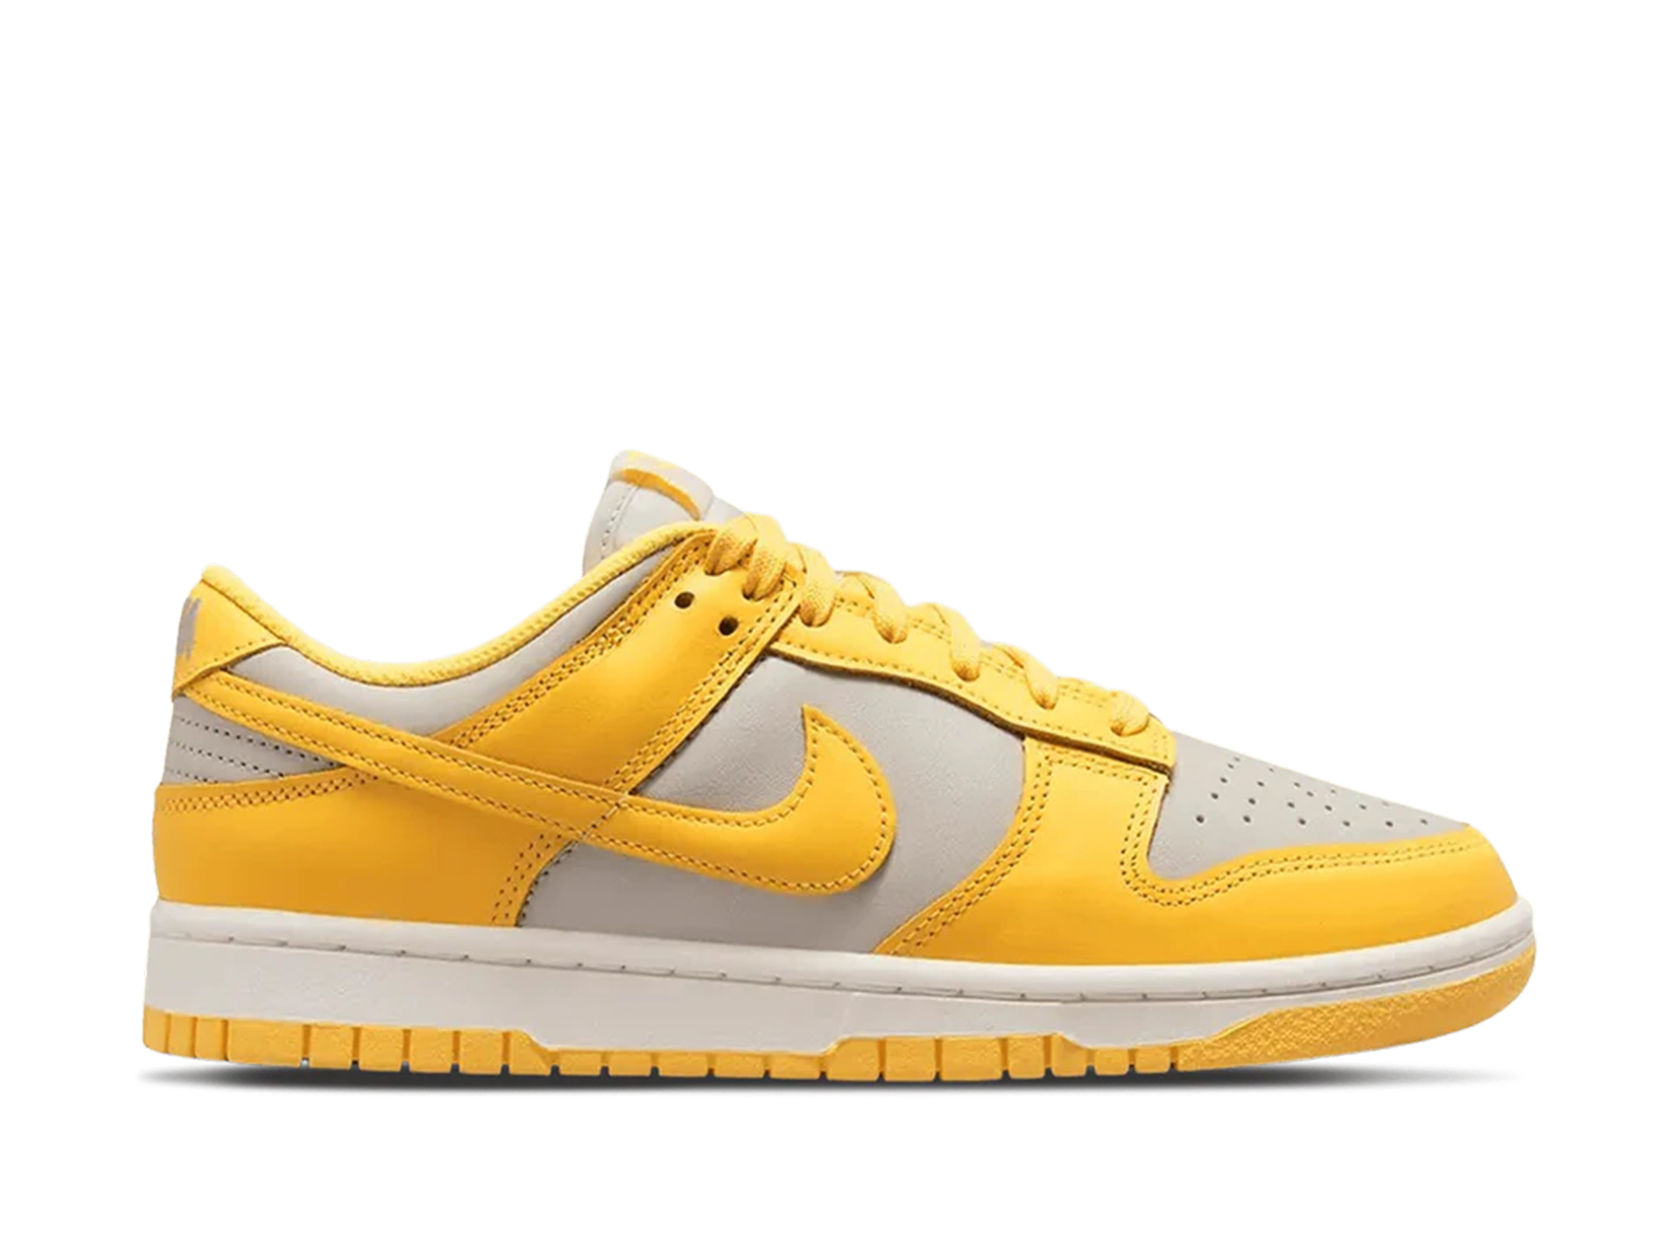 Double Boxed  214.99 Nike Dunk Low Citron Pulse (W) Double Boxed